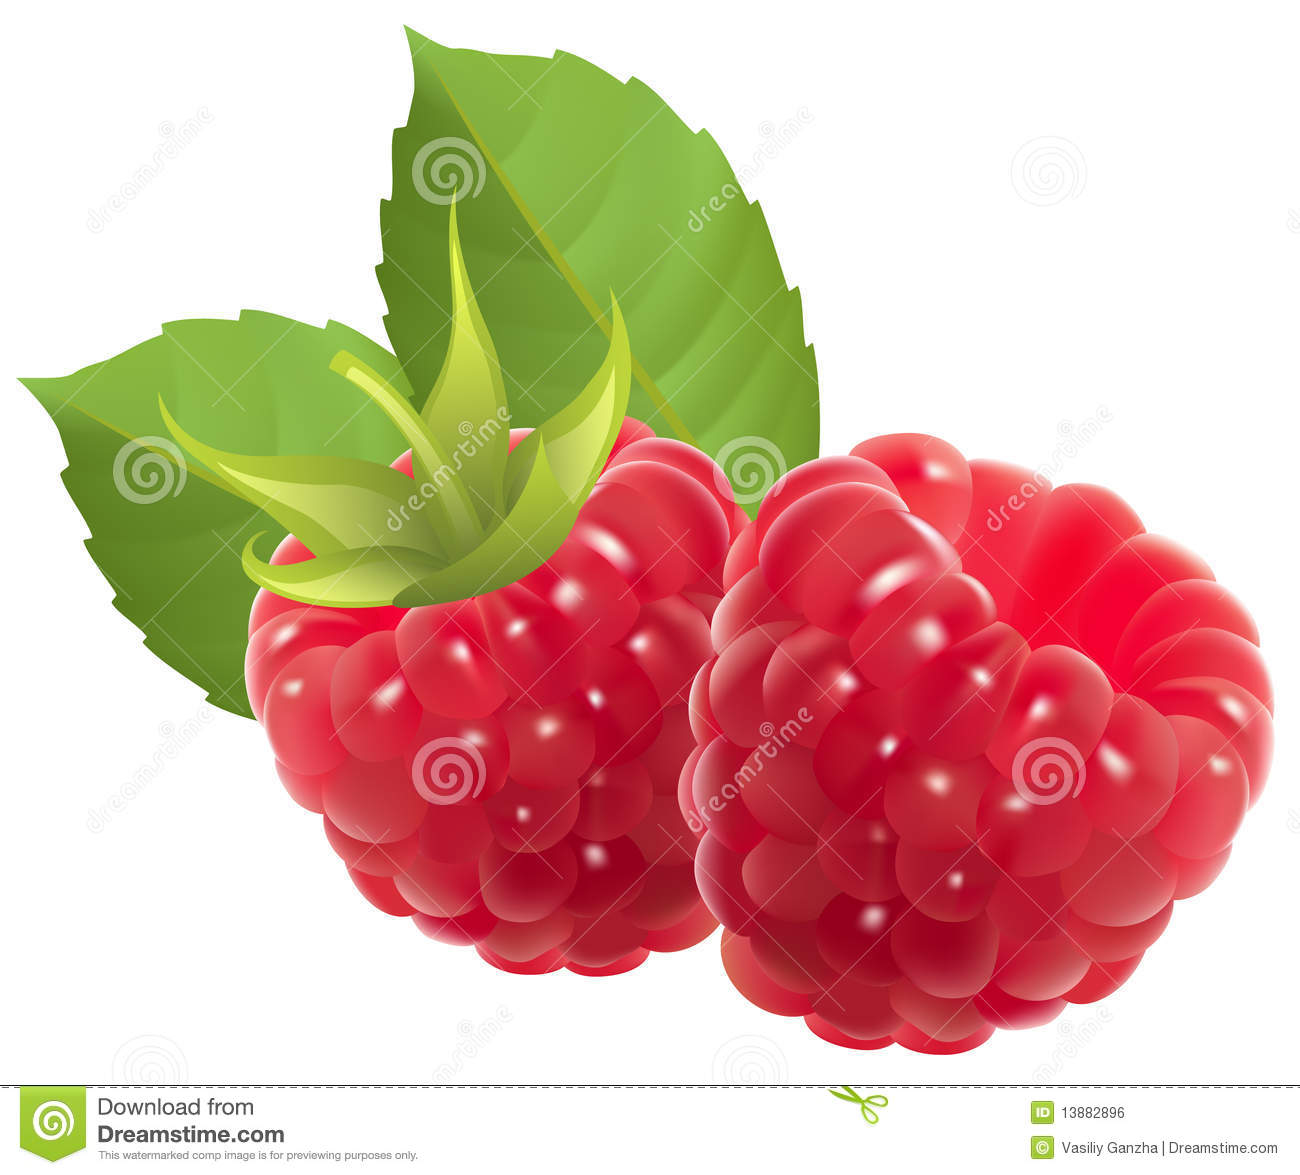 Raspberry Vector Illustration Contains Mesh